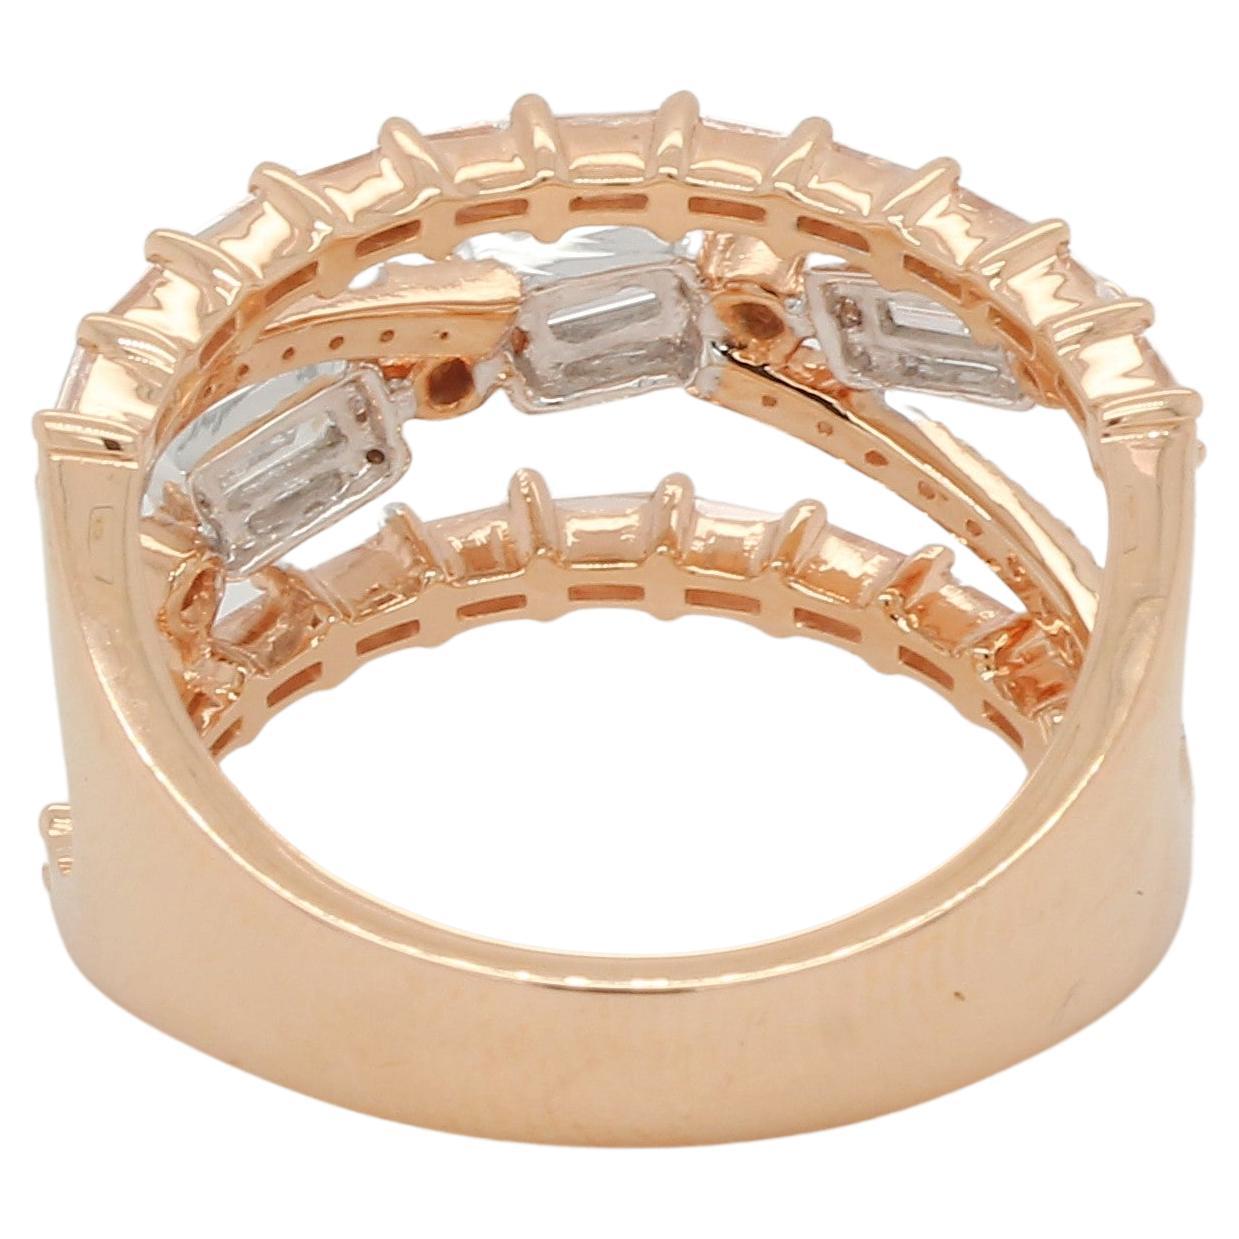 This wedding ring is made of 18 karat gold and designed with diamond illusion for a modern, sophisticated look. It includes 0.20 carats of round diamonds and 0.78 carats of tappers, giving it an illusion in the center and on both sides for a